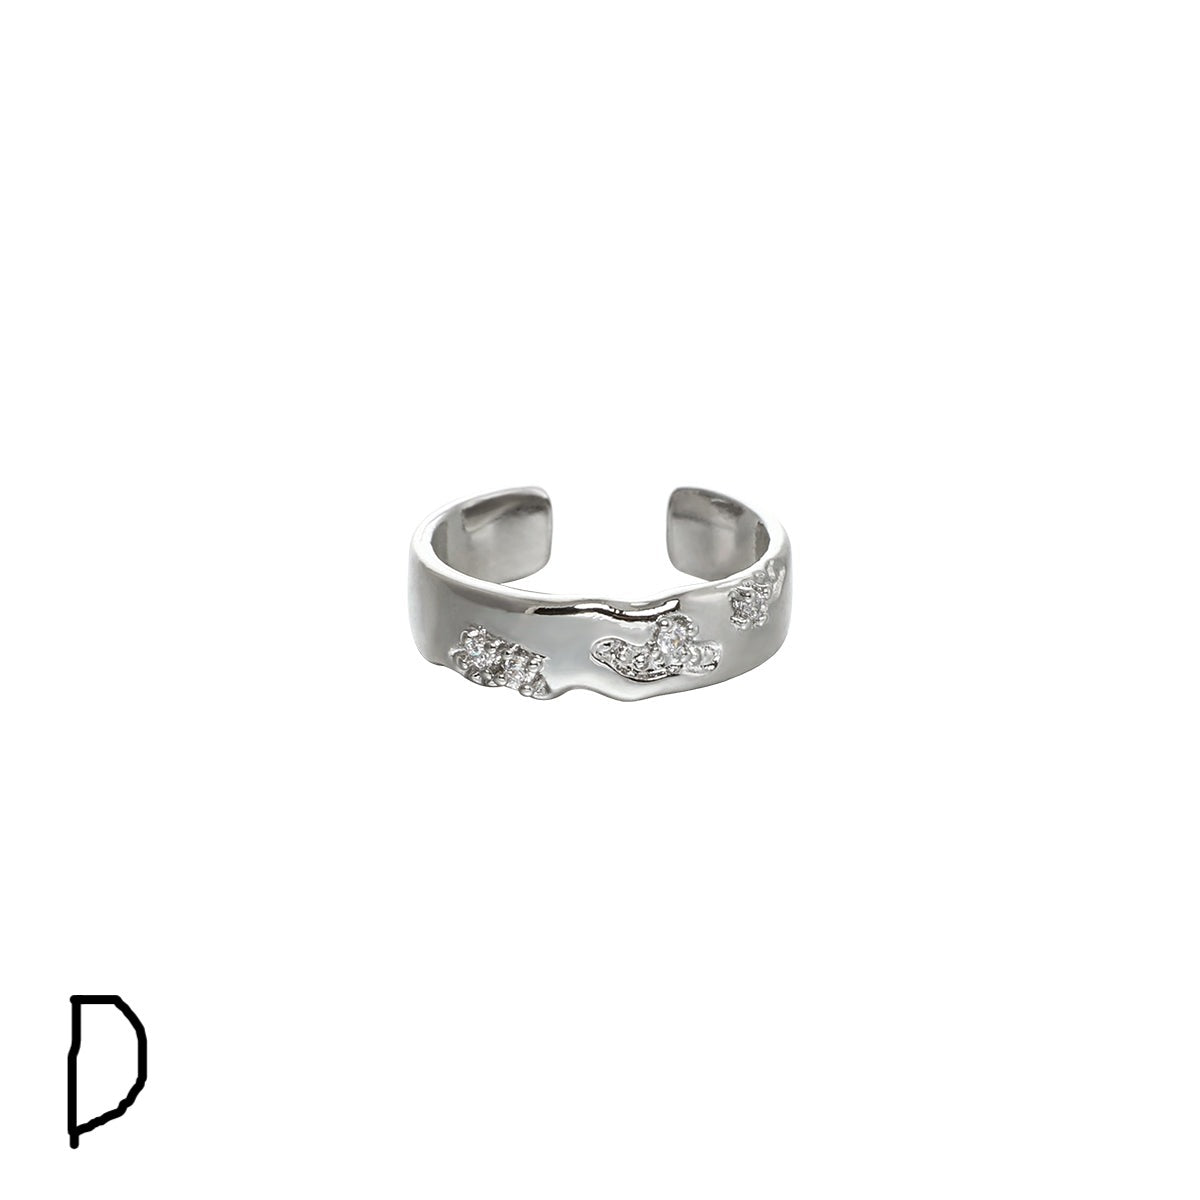 Minimalist Neutral Style Personalized Ring